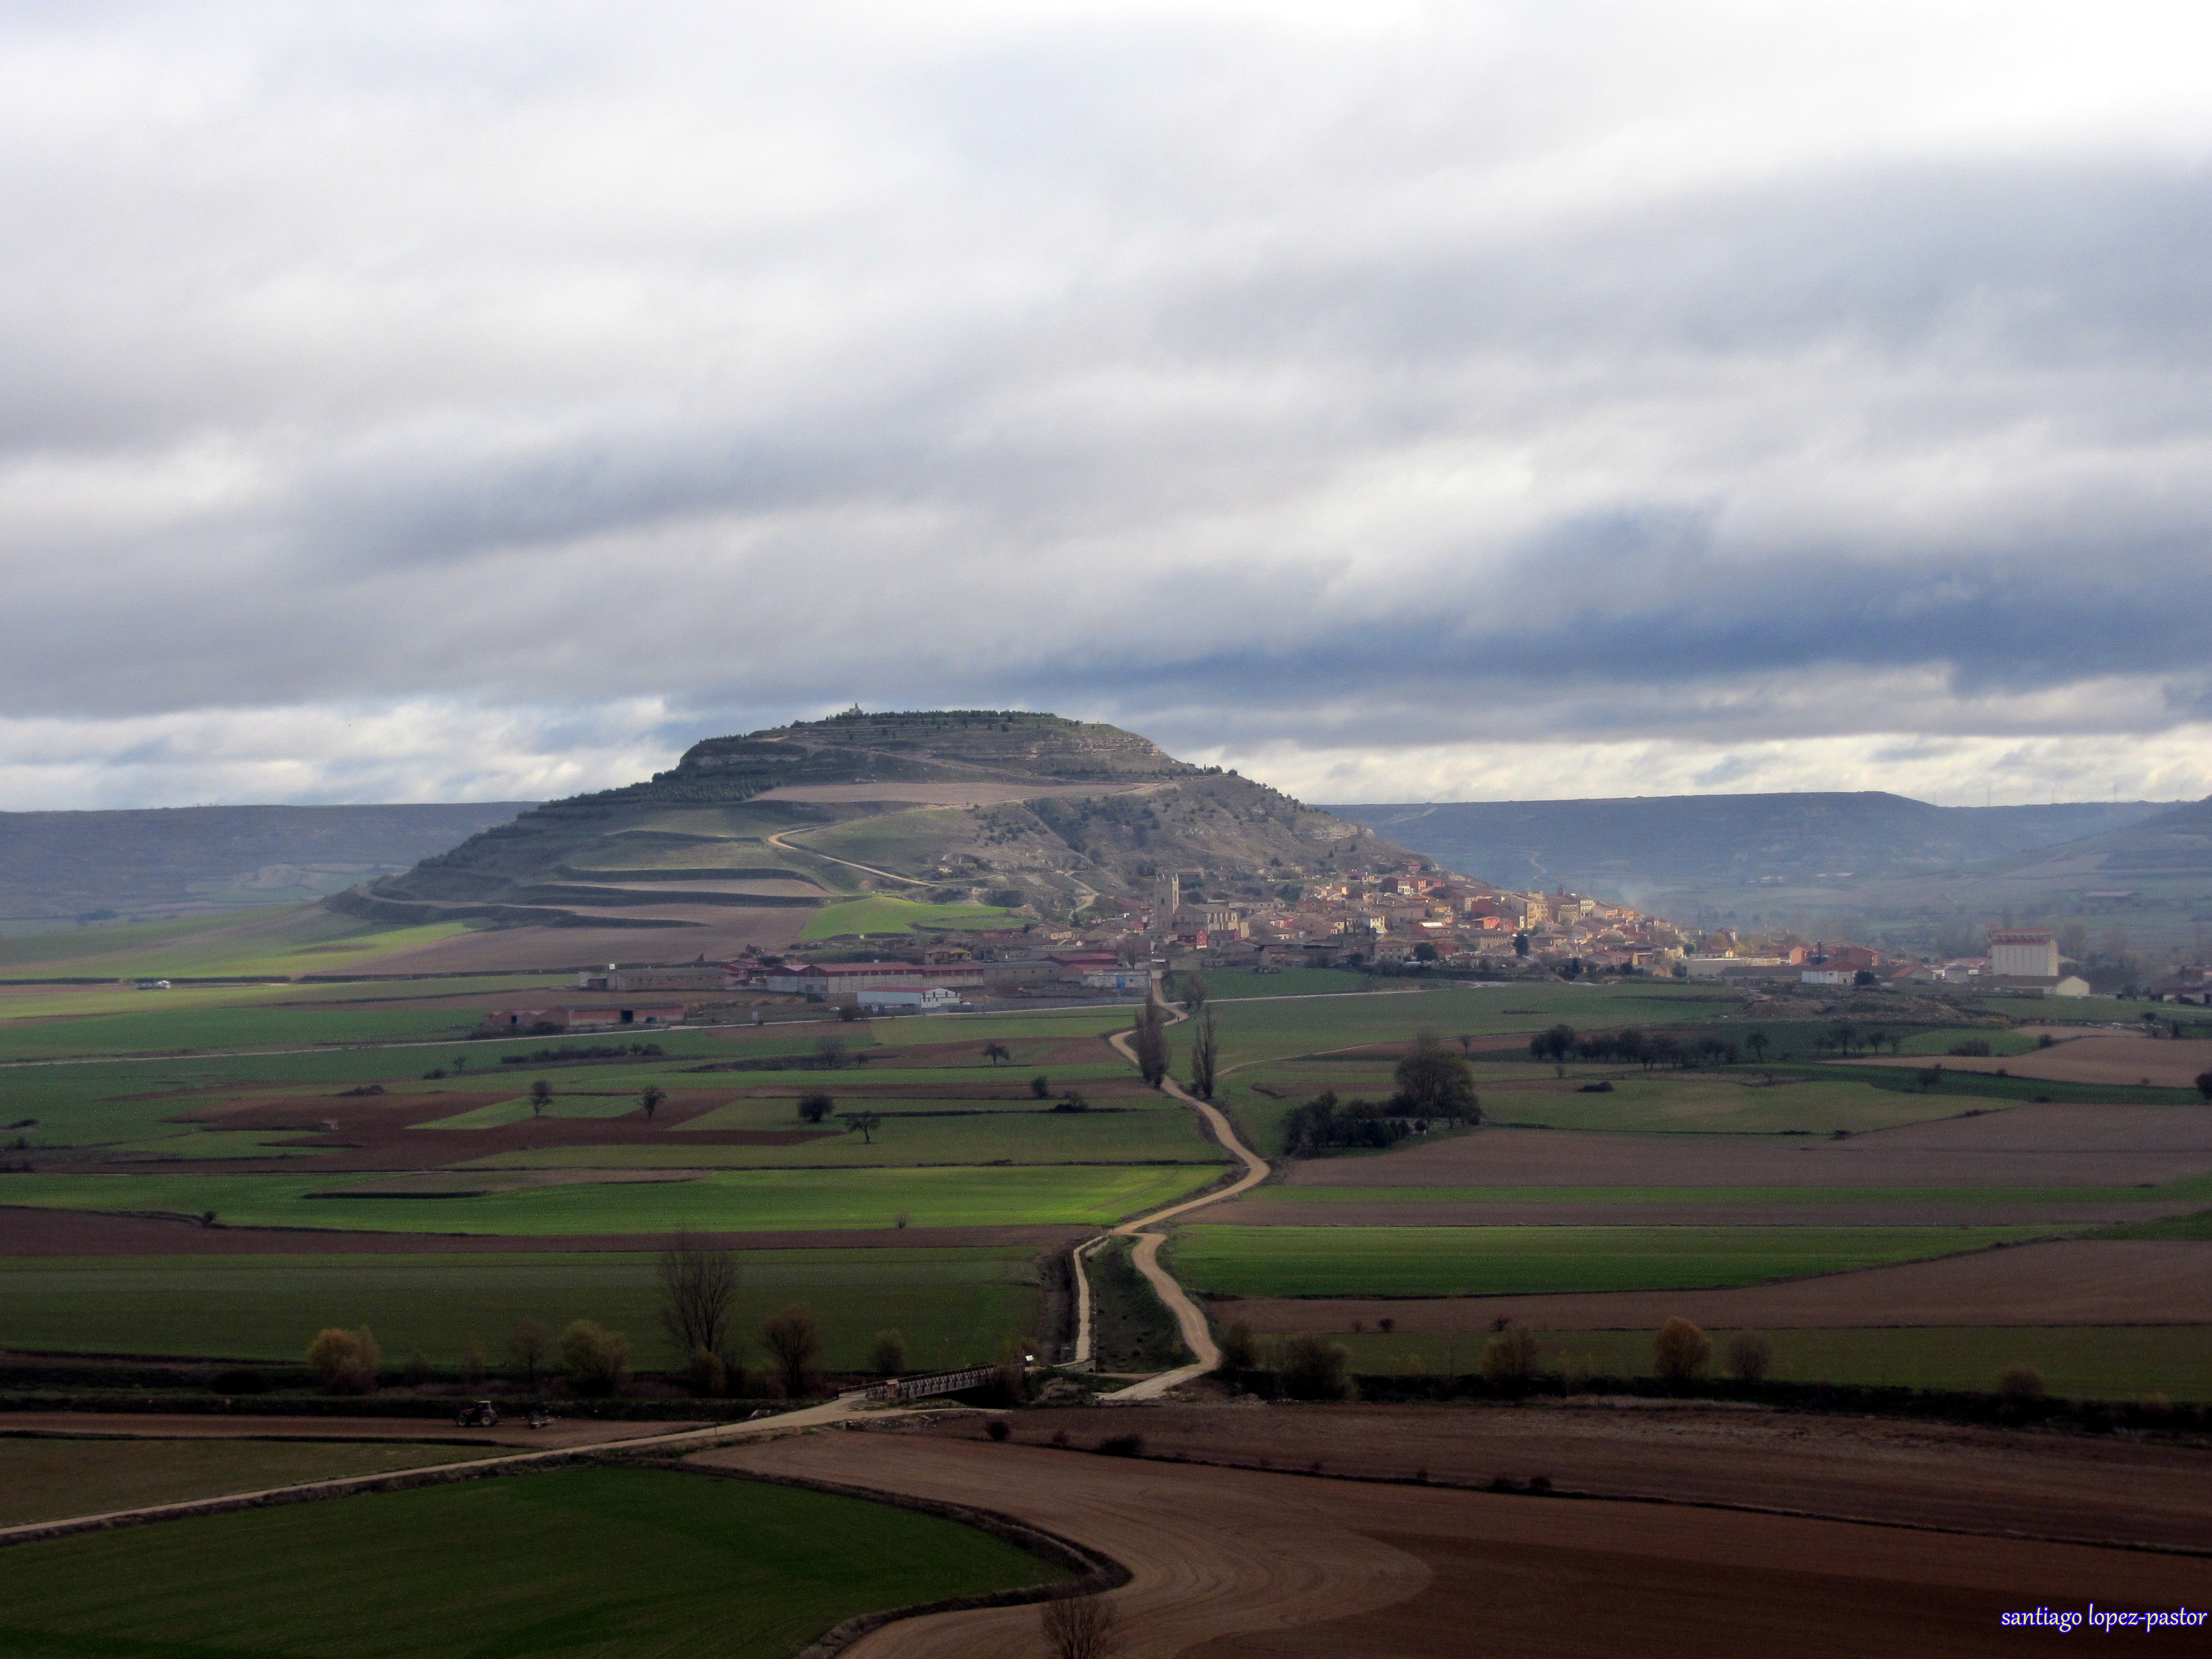 Cerro de Castrojeriz seen from the top of Mostoles in a cloudy day